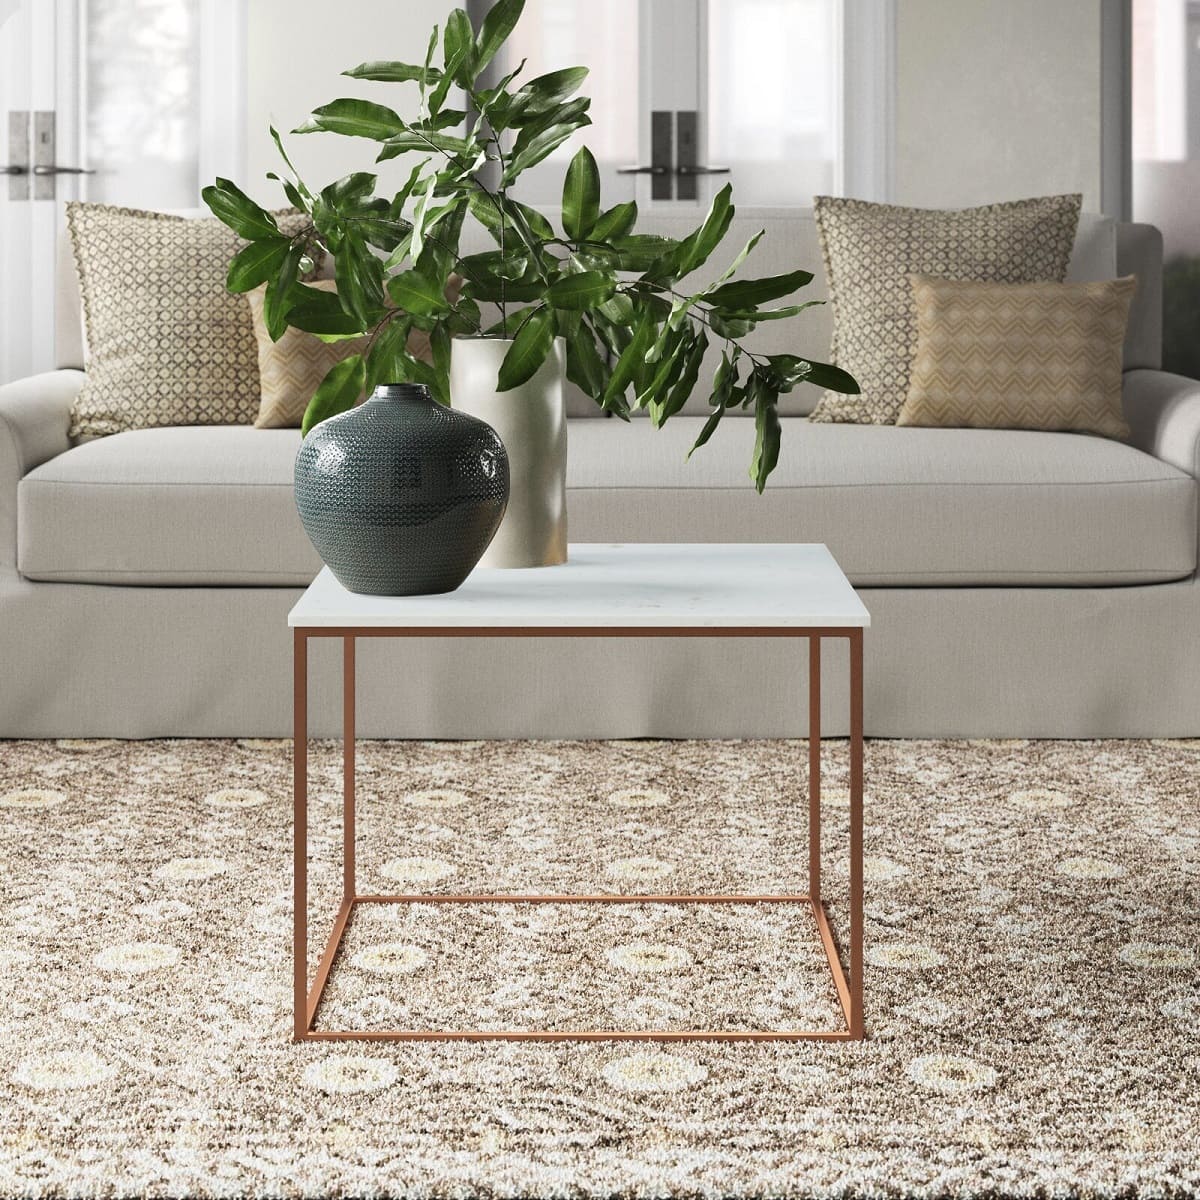 10 Best Small Square Coffee Table For 2023 1698109062 